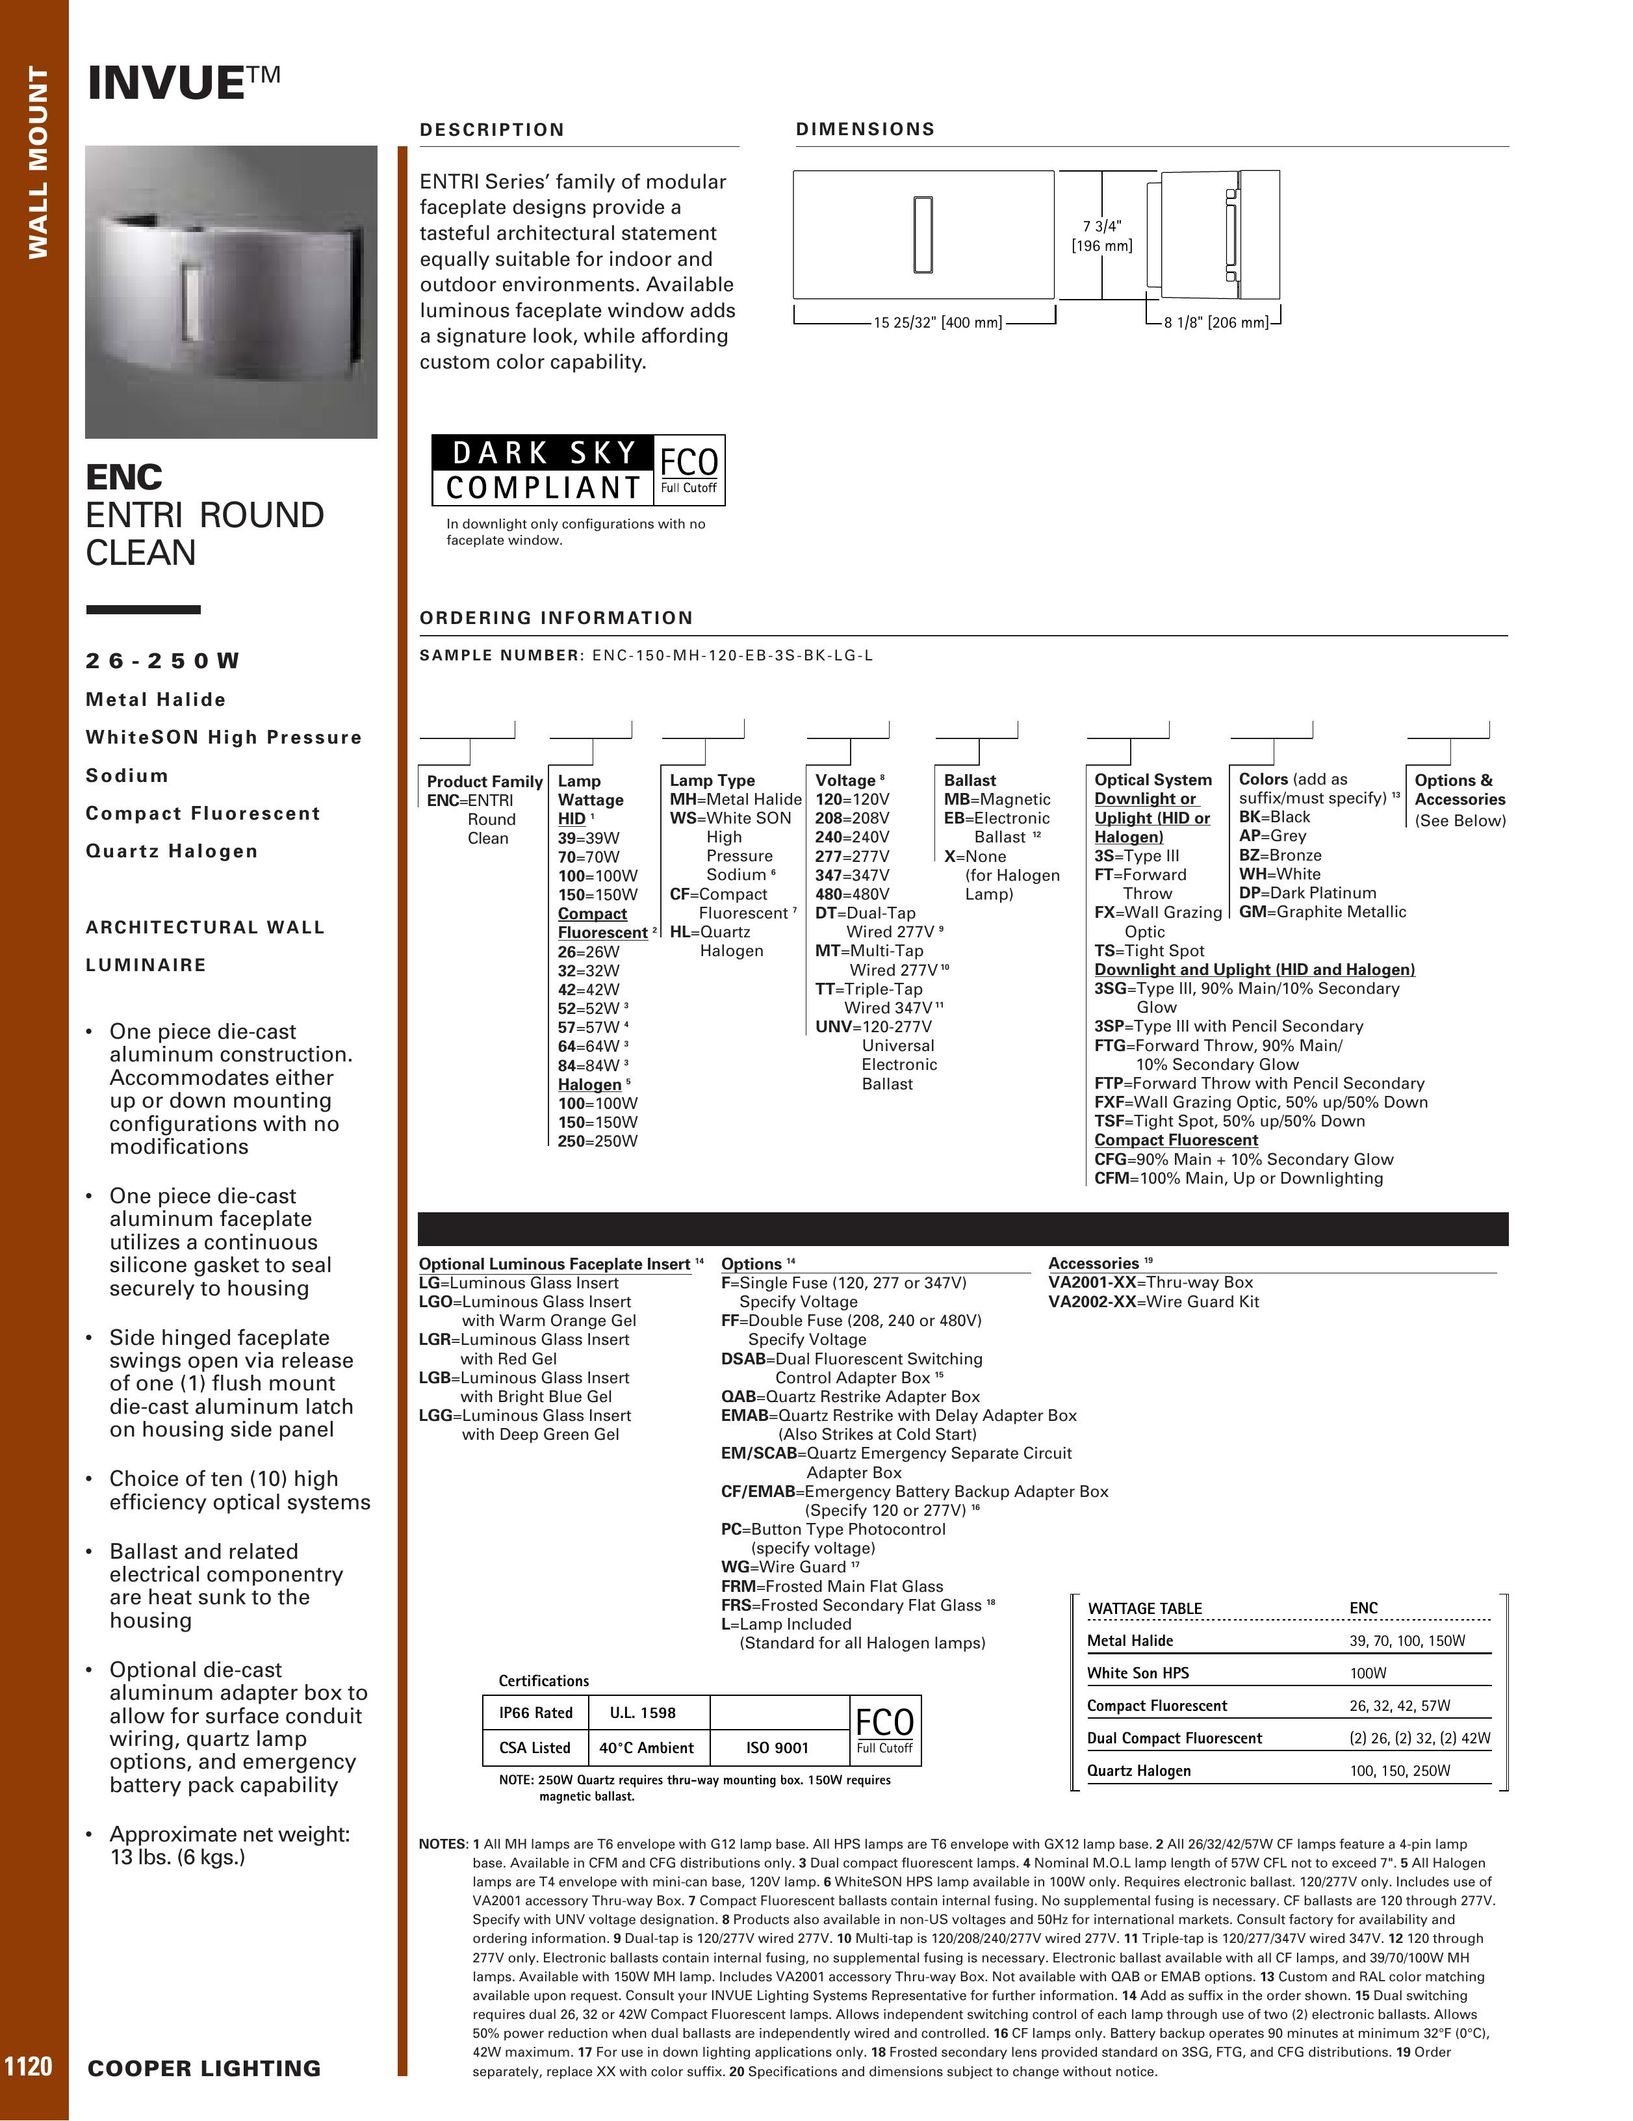 Cooper Lighting ENC Home Safety Product User Manual